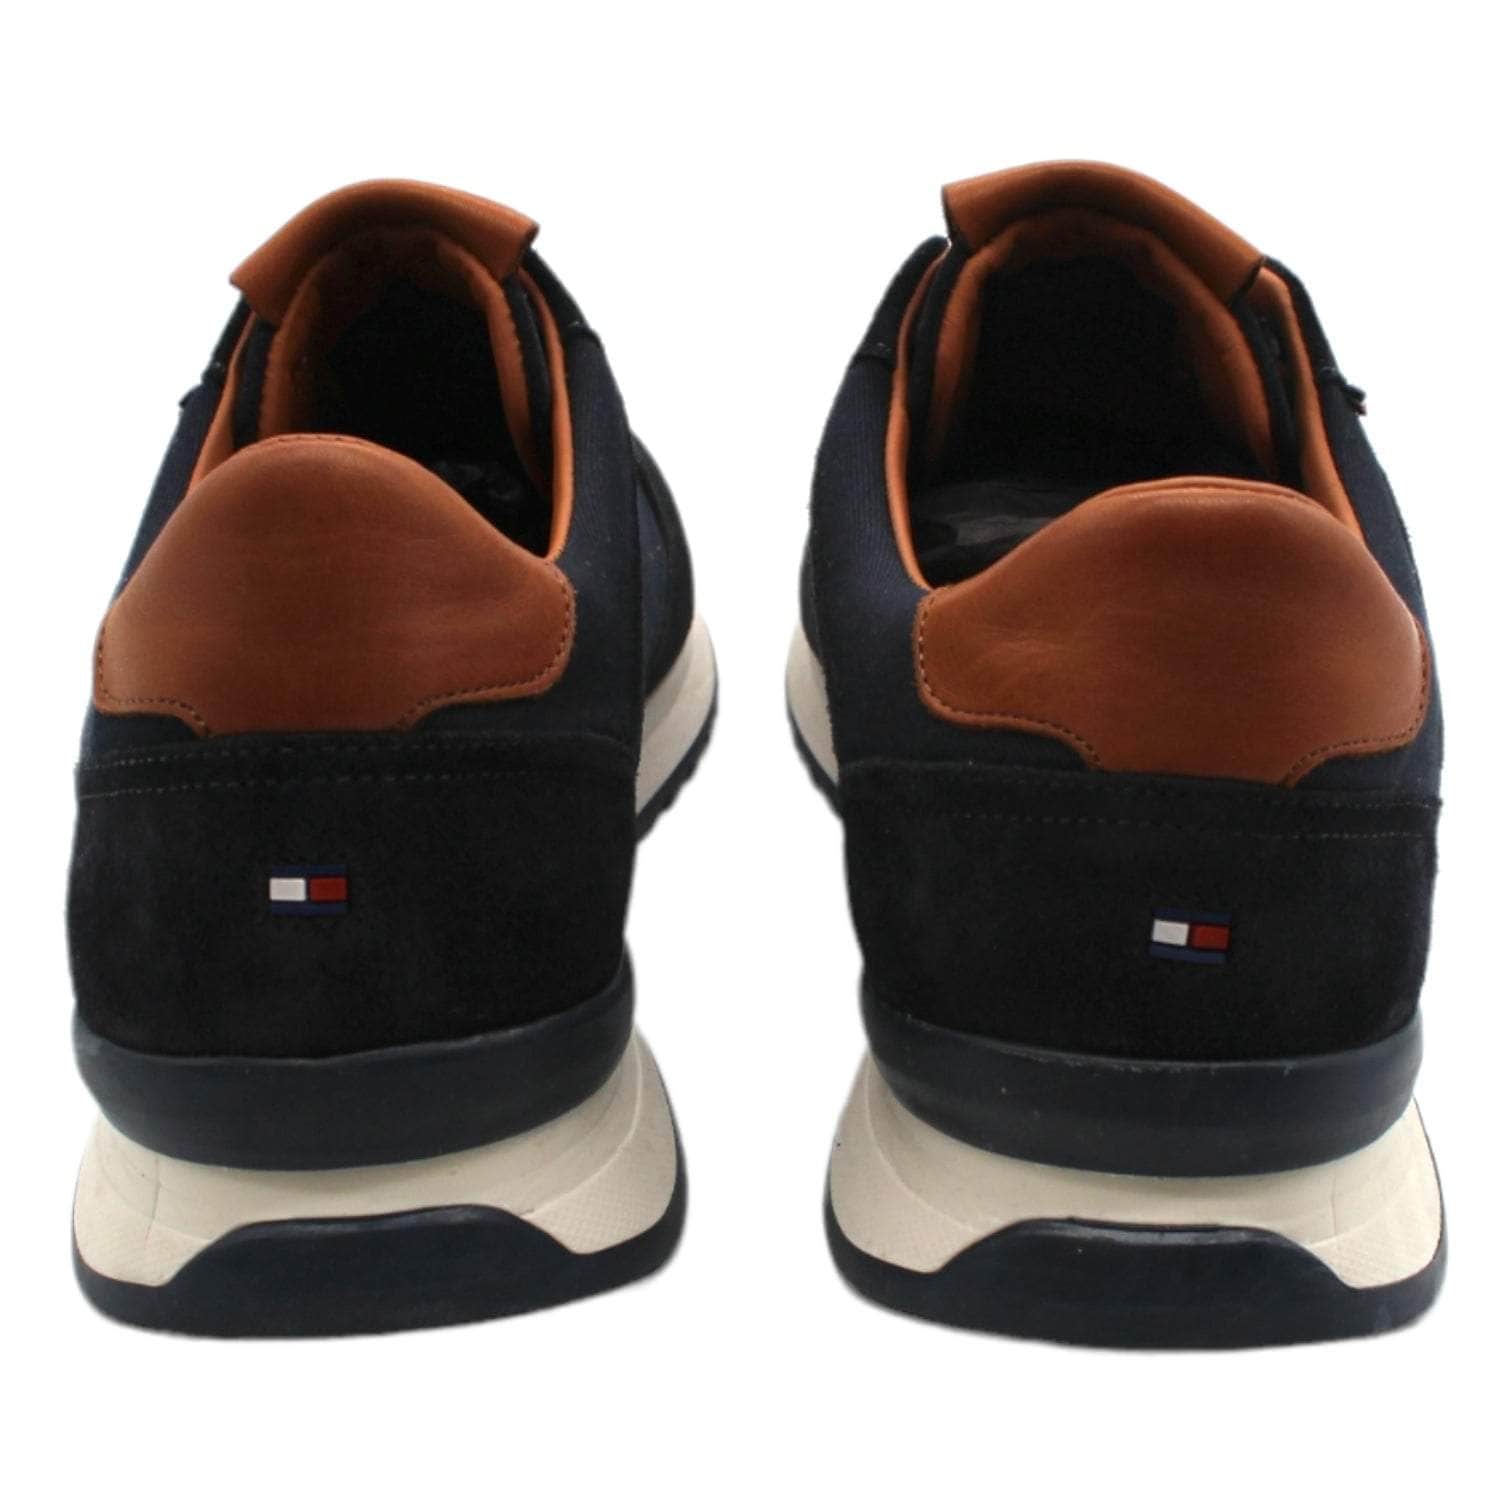 Tommy Hilfiger Navy Embroidered Logo Trainers